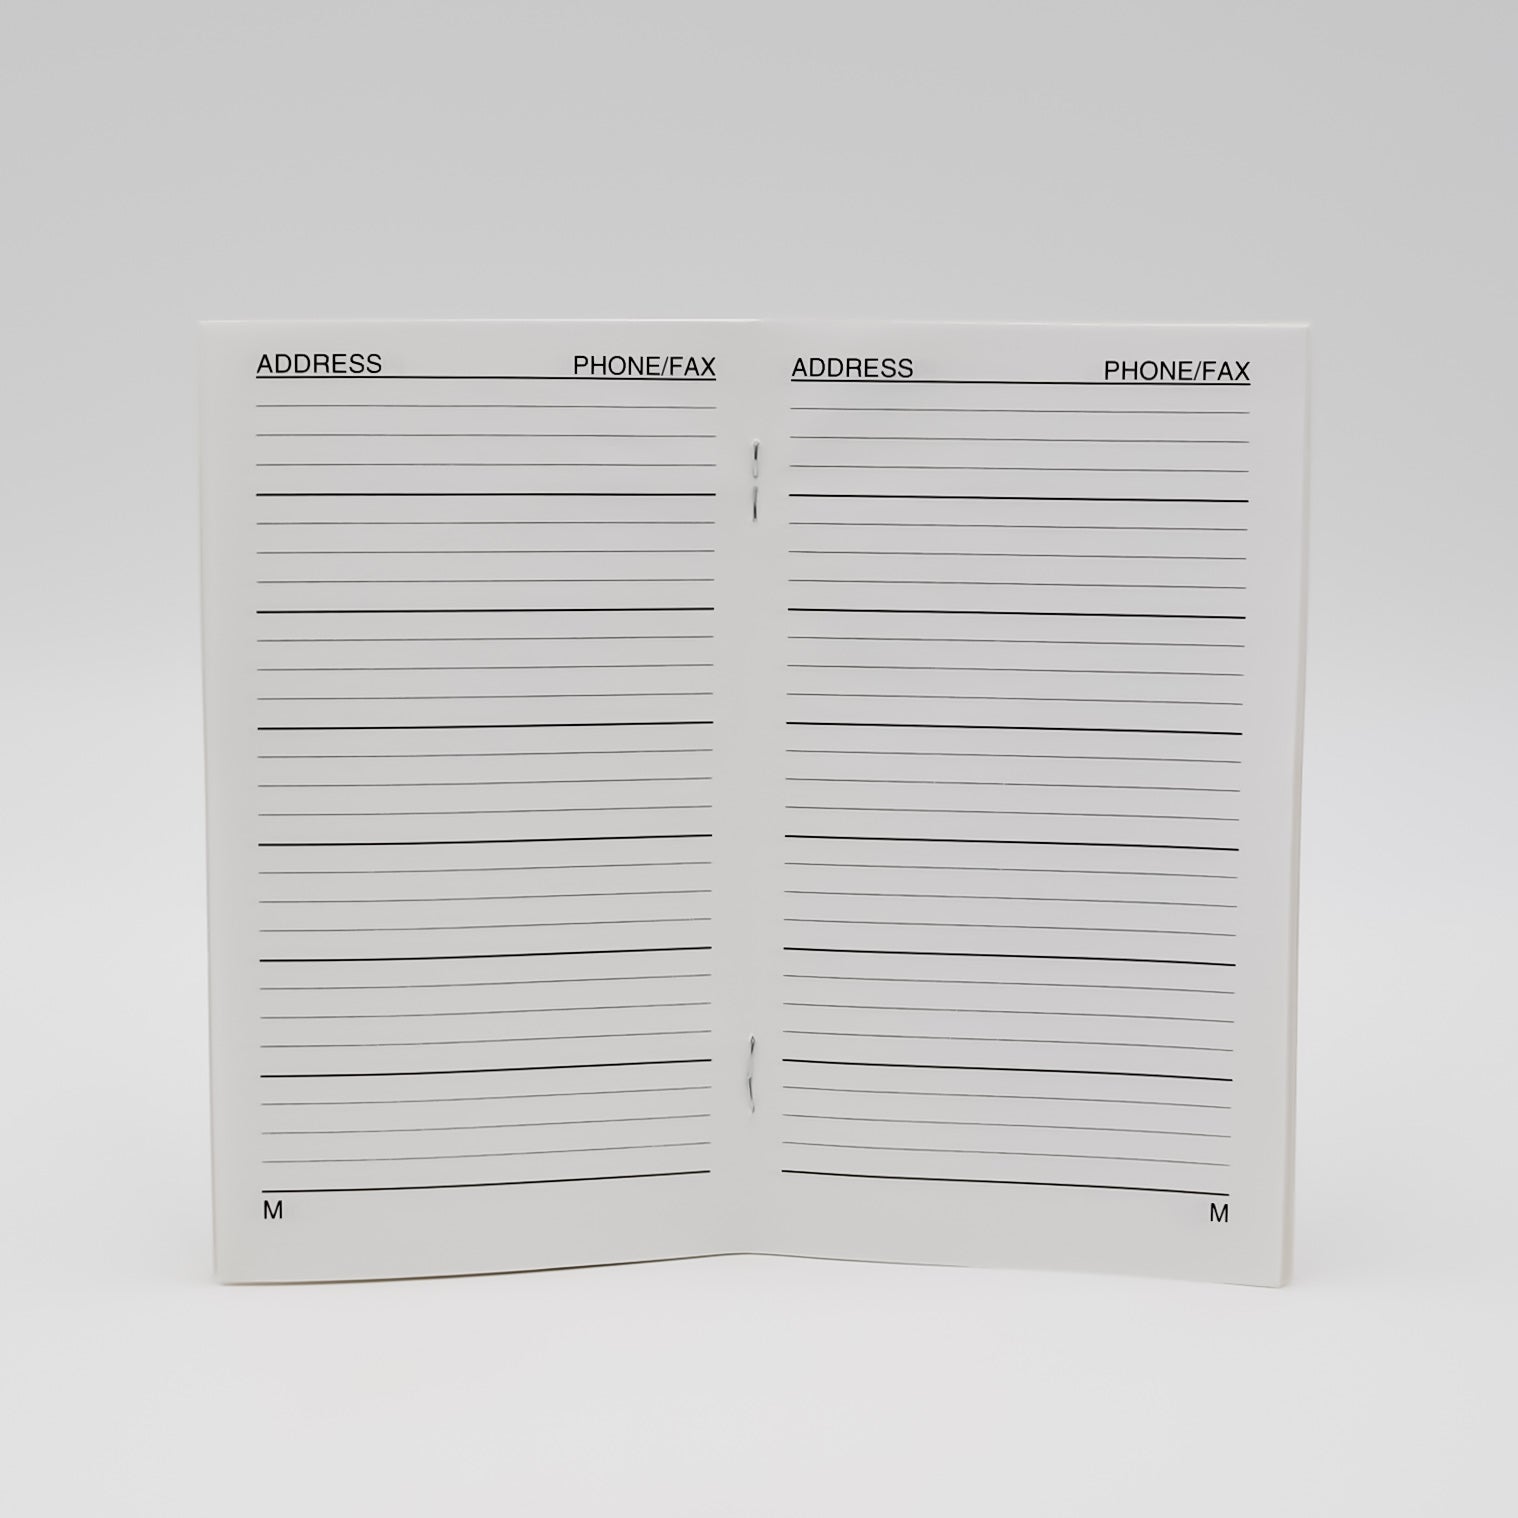 Address: 3-1/8 x 6-3/8 Telephone Staple Bound Book  Address/Telephone book organizer with white cover and 32 pages, 16 sheets ruled insert refill pages